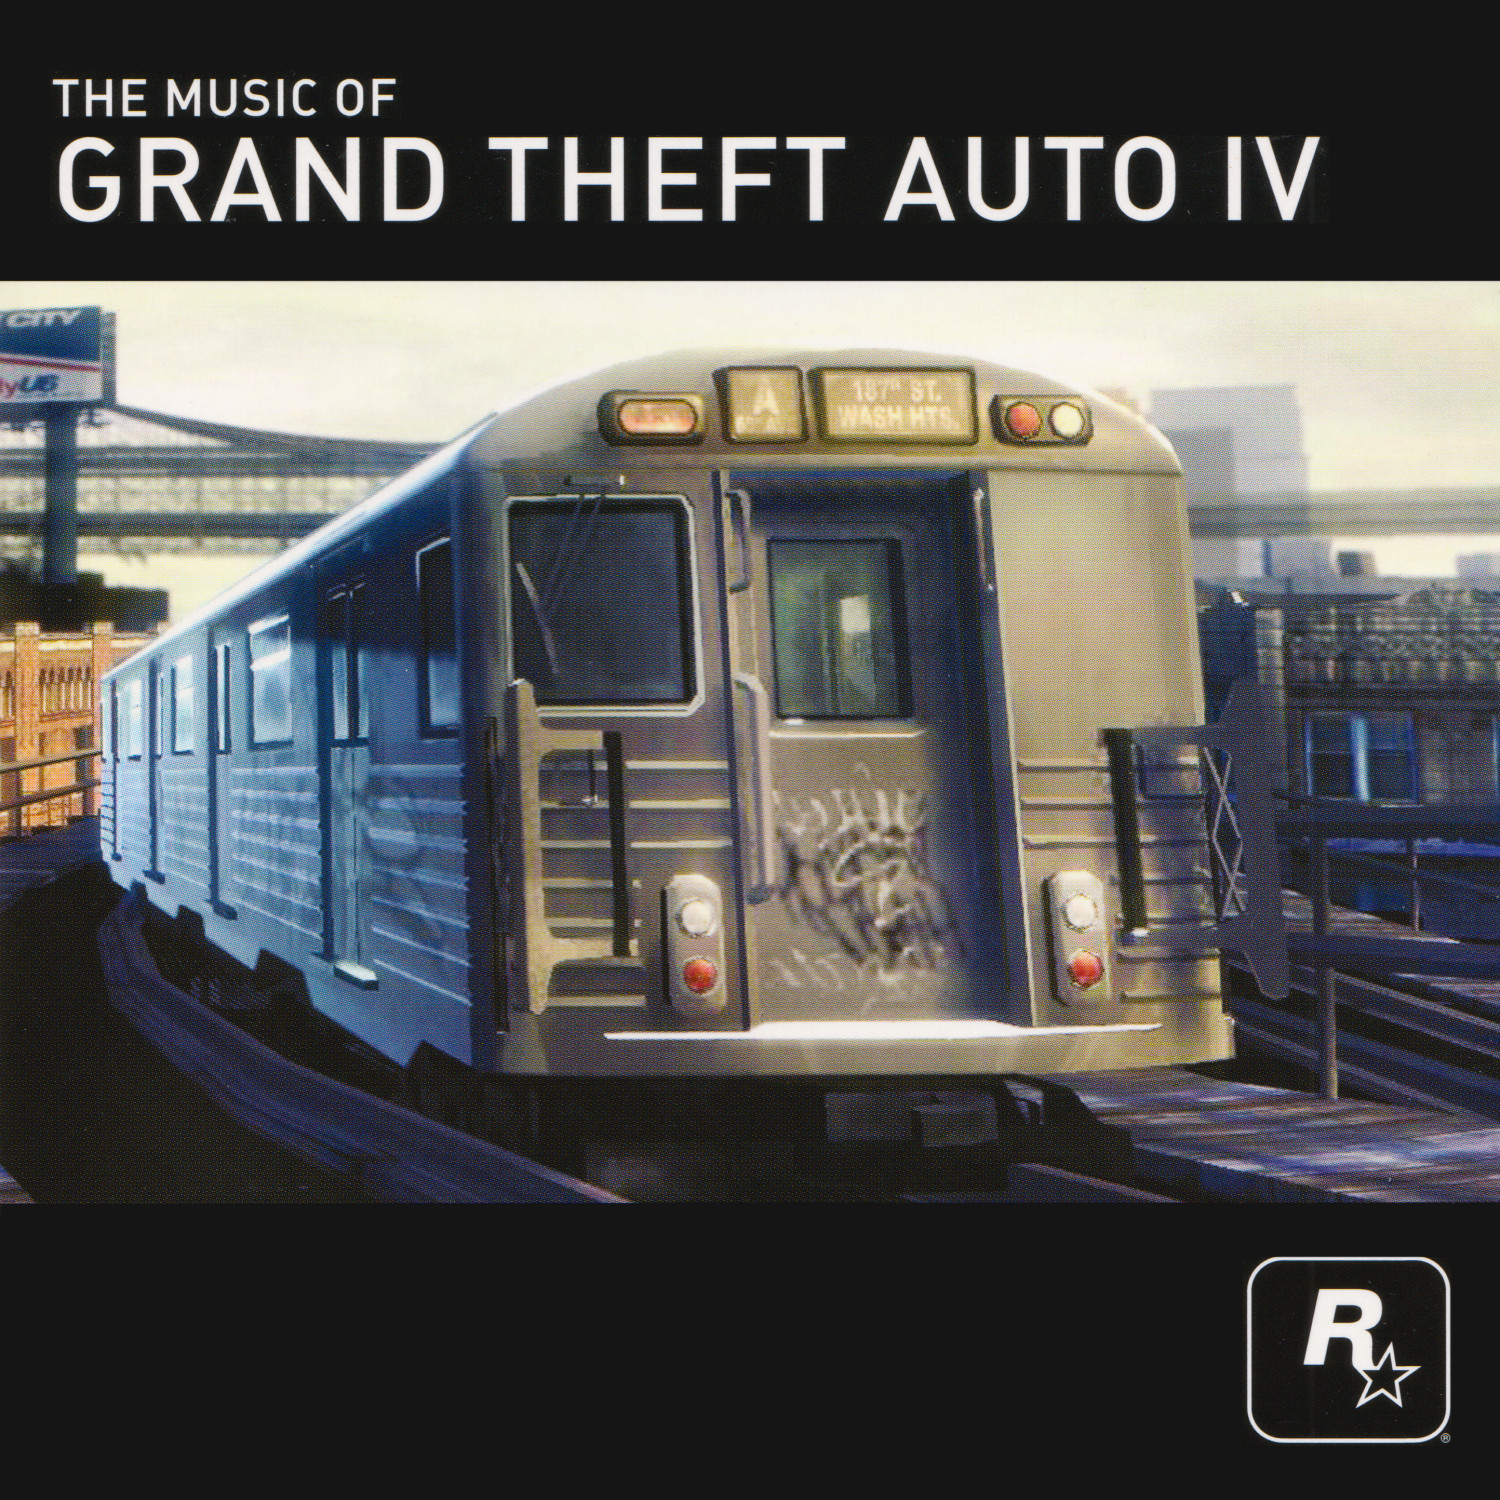 Soviet connection gta. The Music of Grand Theft auto IV. Vagabond Greenskeepers GTA 4 обложка. Soviet connection обложка. Michael Hunter Grand Theft.